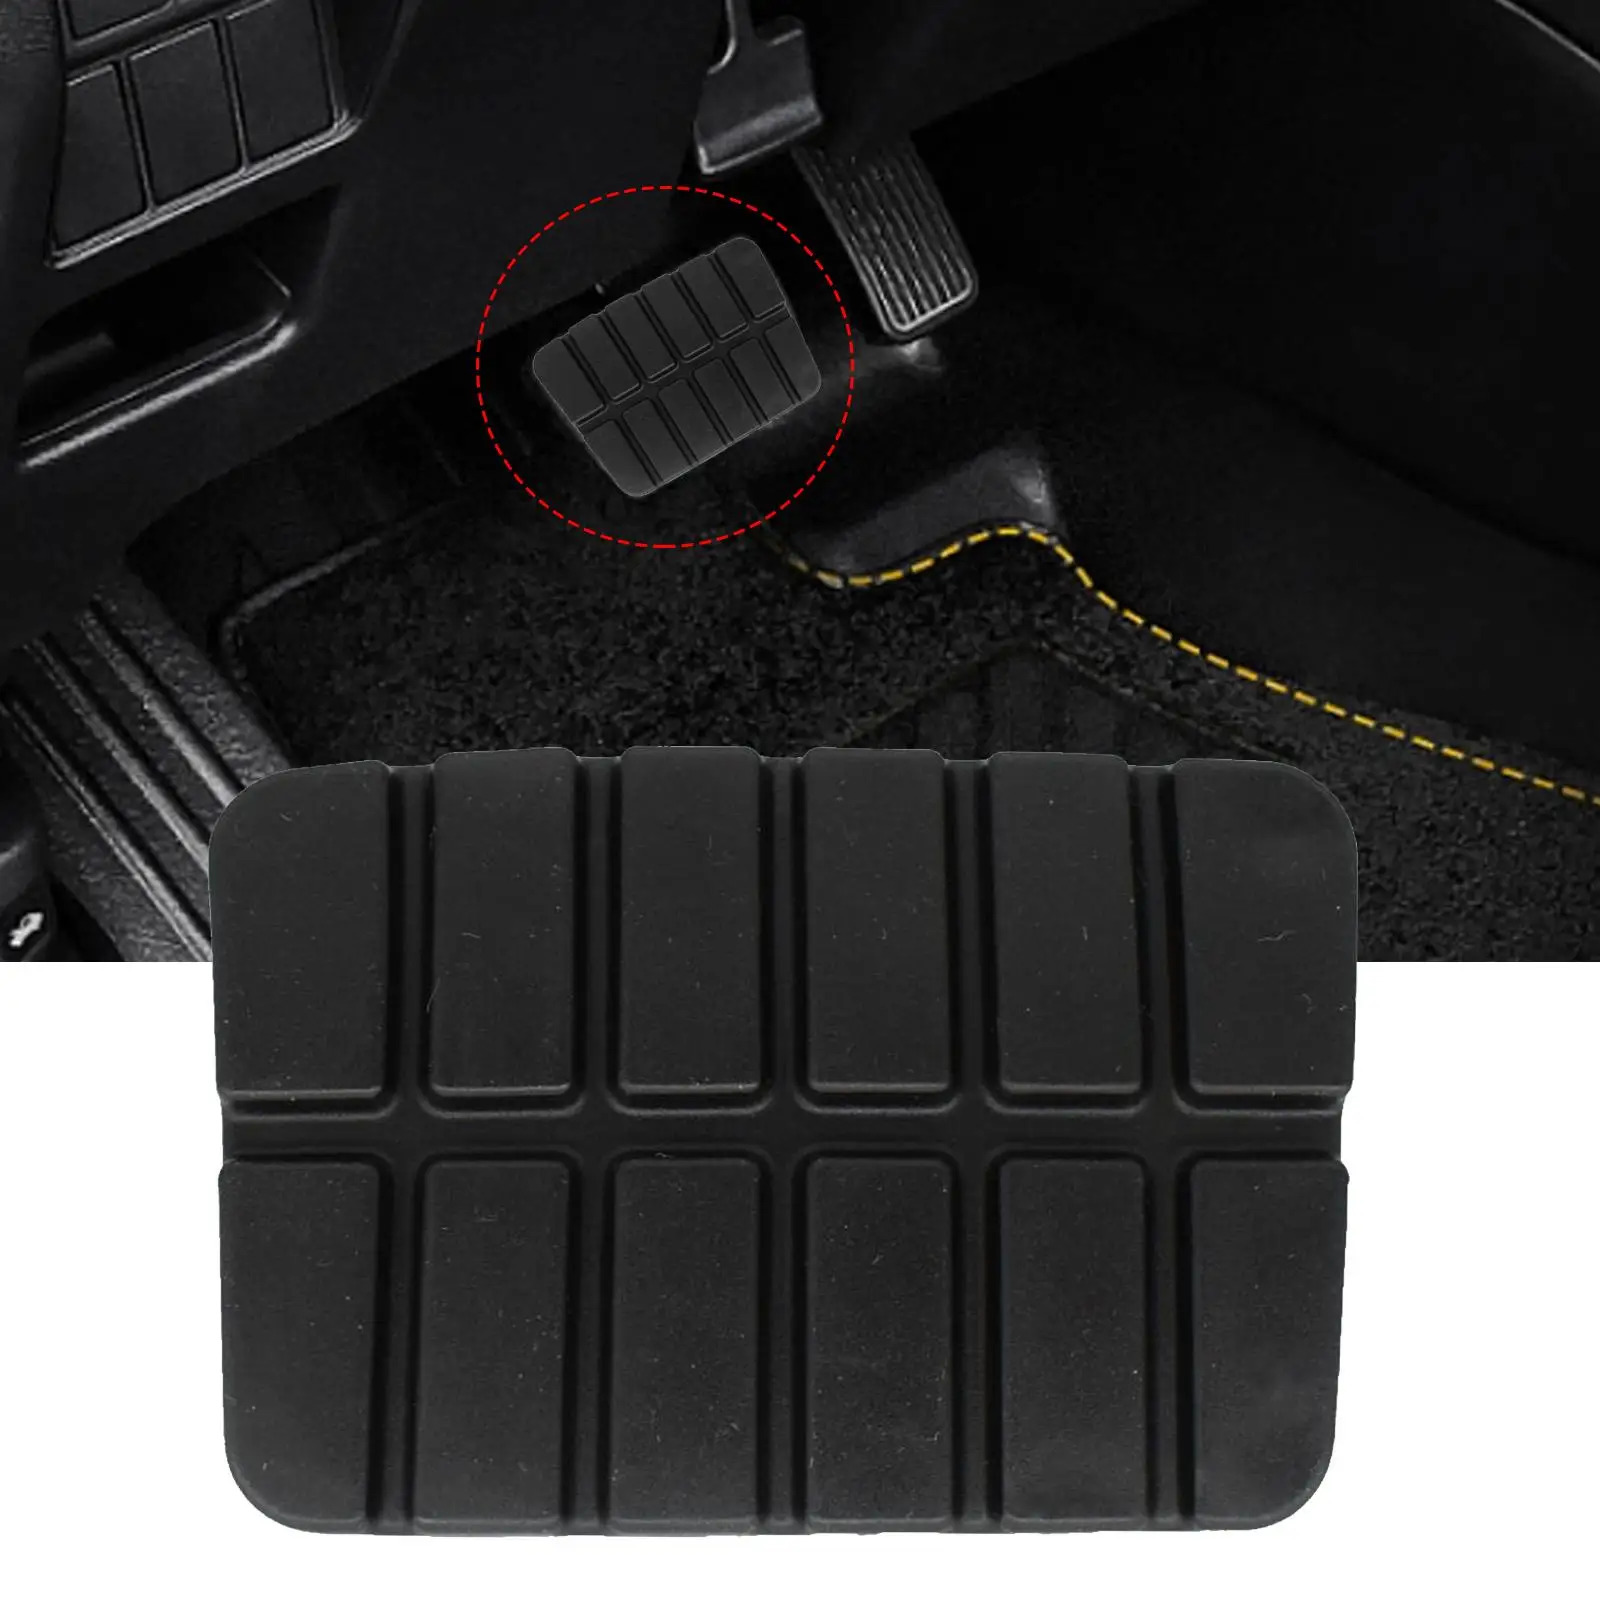 Brake Clutch Pedal Pad Replacement 49751-ni110 Car Brake Clutch Pedal Rubber Pad Cover for Nissan Navara D21 D22 1986-2006